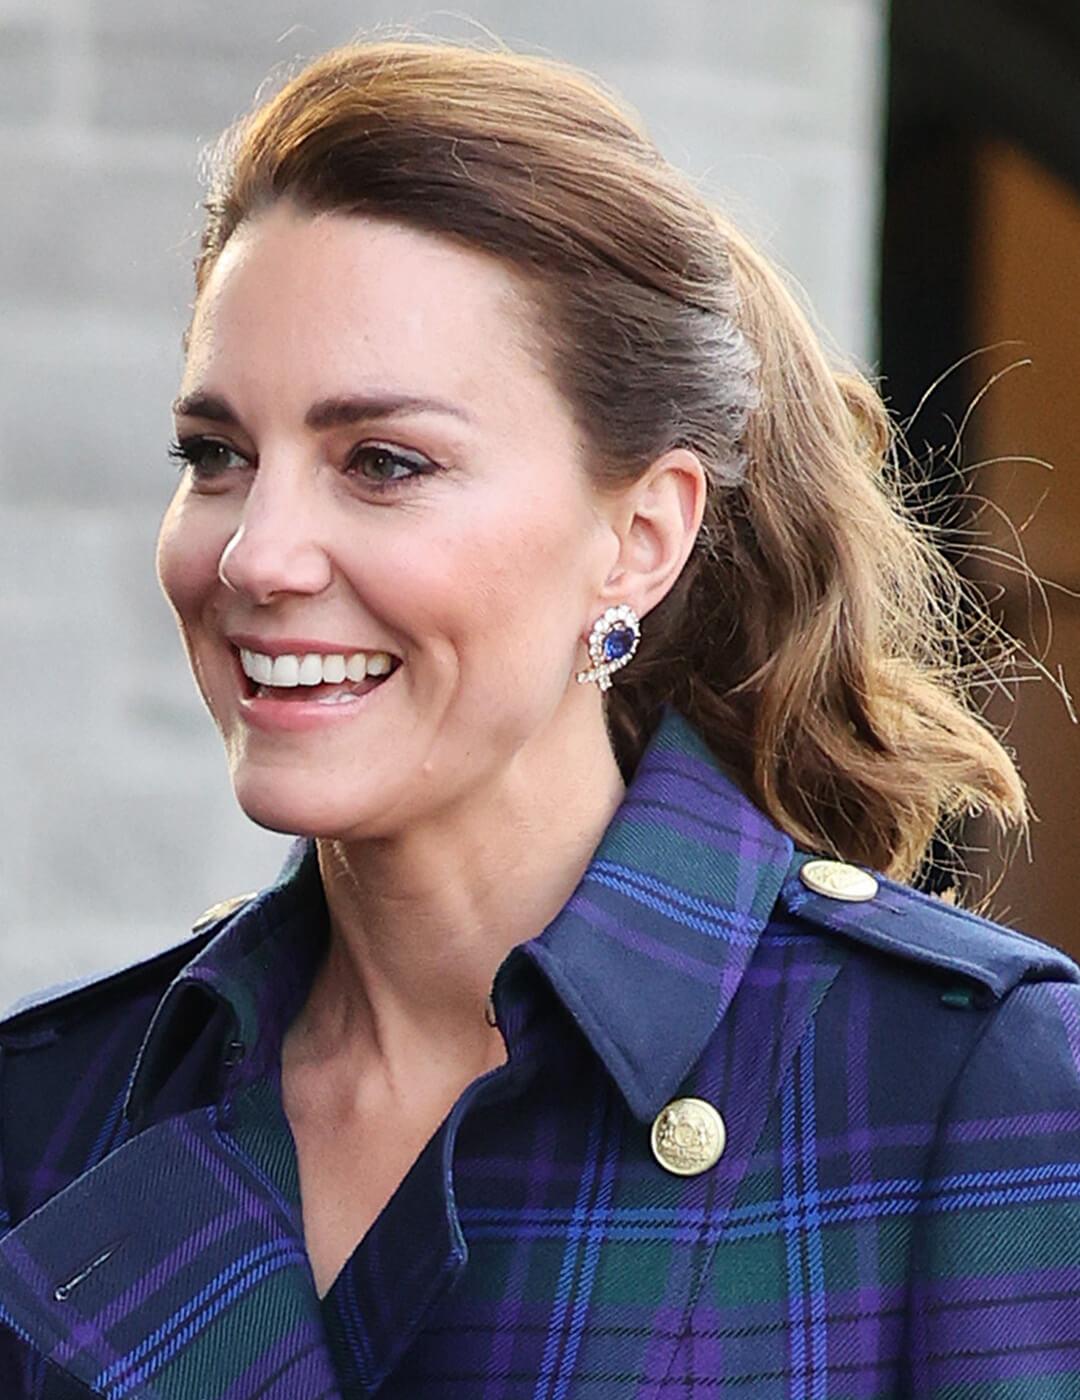 Catherine, Duchess of Cambridge rocking a pulled back ponytail hairstyle and blue plaid coat